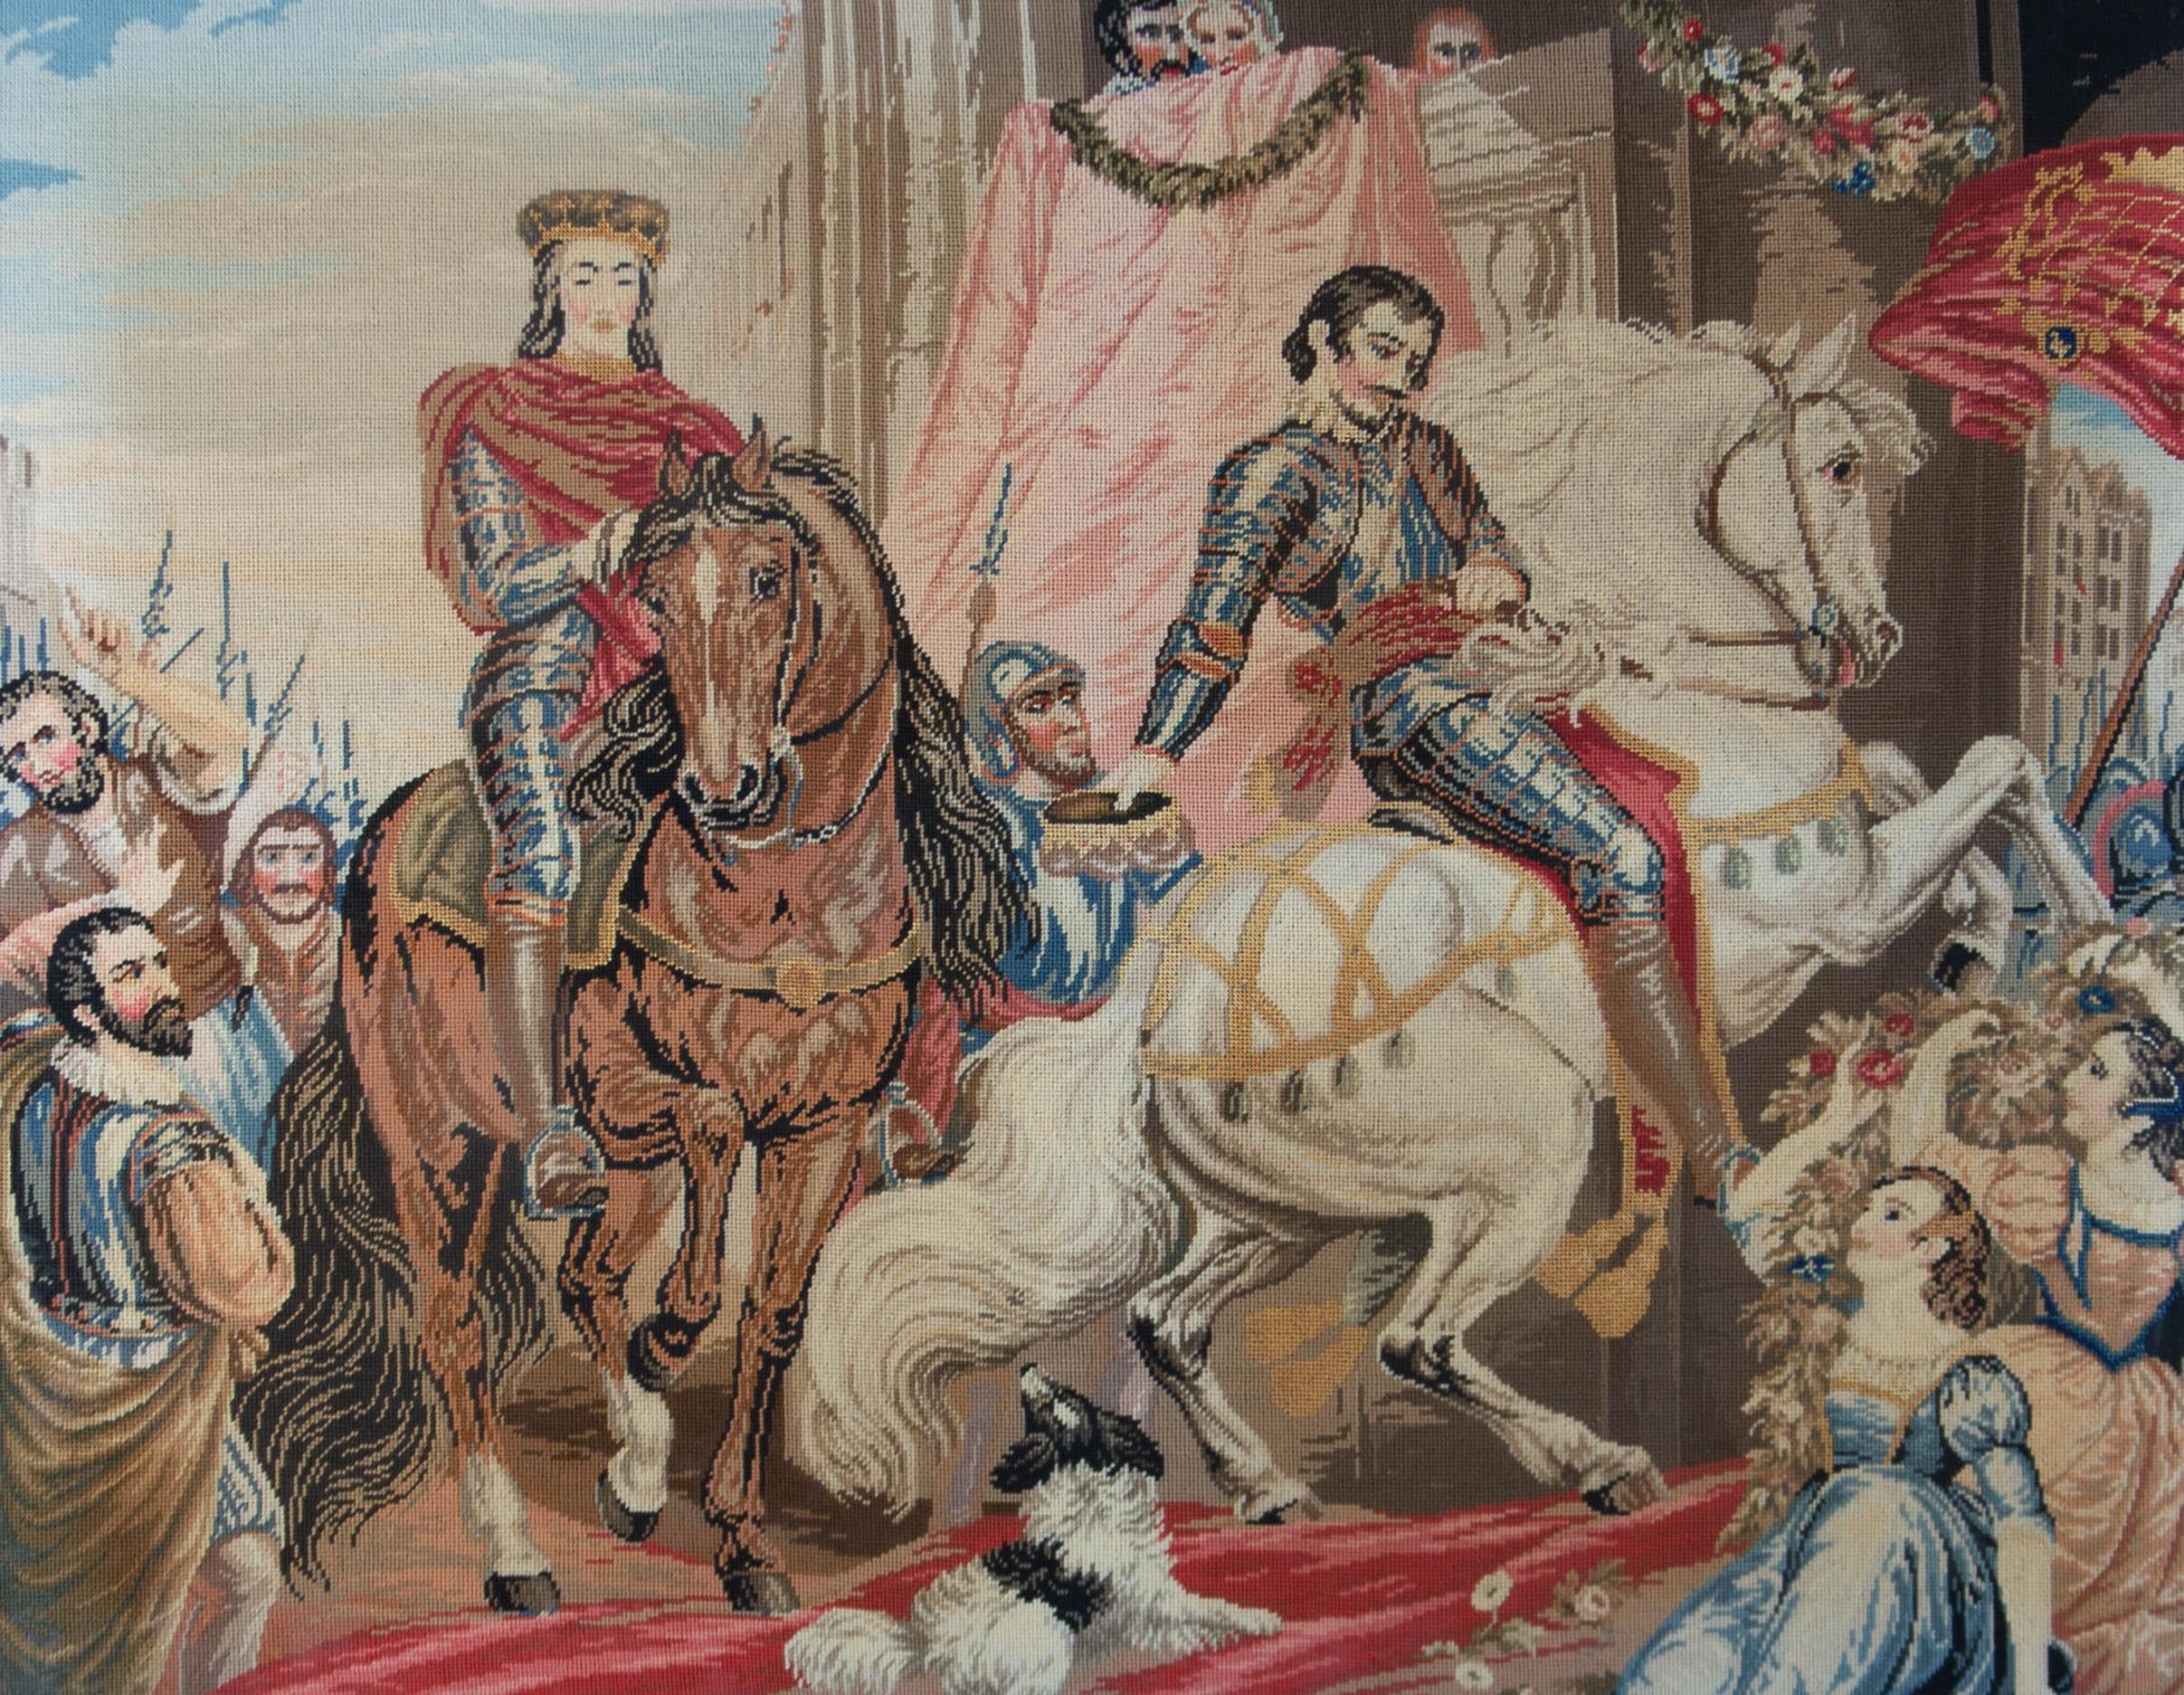 A large needlepoint scene in wool with gold silk thread depicting two chevaliers returning from battle, likely after an original tapestry or painting, dating to the late-19th or early-20th century. Presented glazed in an oak frame.
